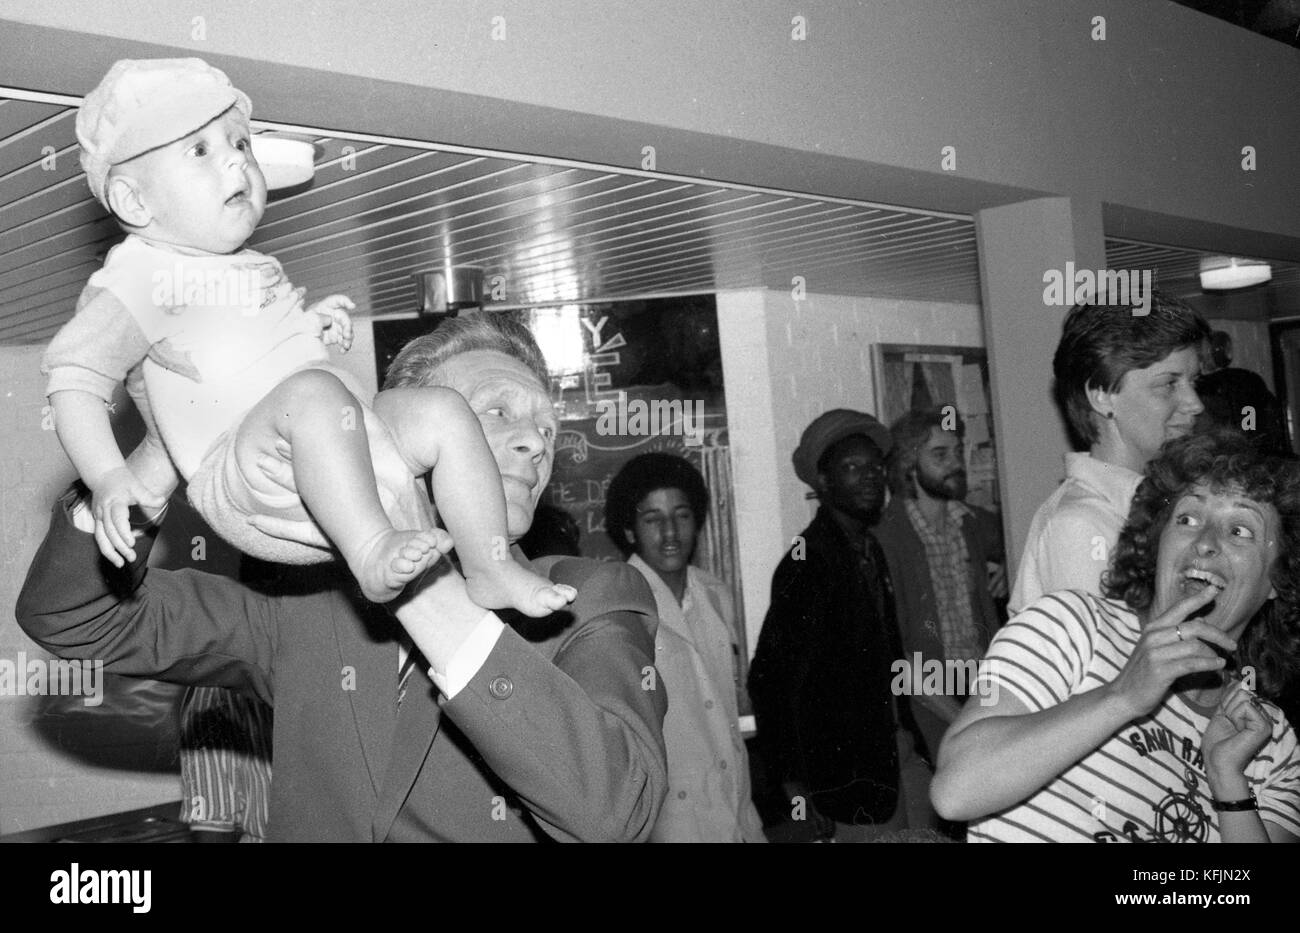 18 May 1982, Deptford. Princess Diana on a Royal visit to open the Albany Arts Centre for the community of Deptford.  A visitor holds aloft a baby to get Diana's attention.  Photo by Tony Henshaw *** Local Caption *** Copyright Tony Henshaw Stock Photo